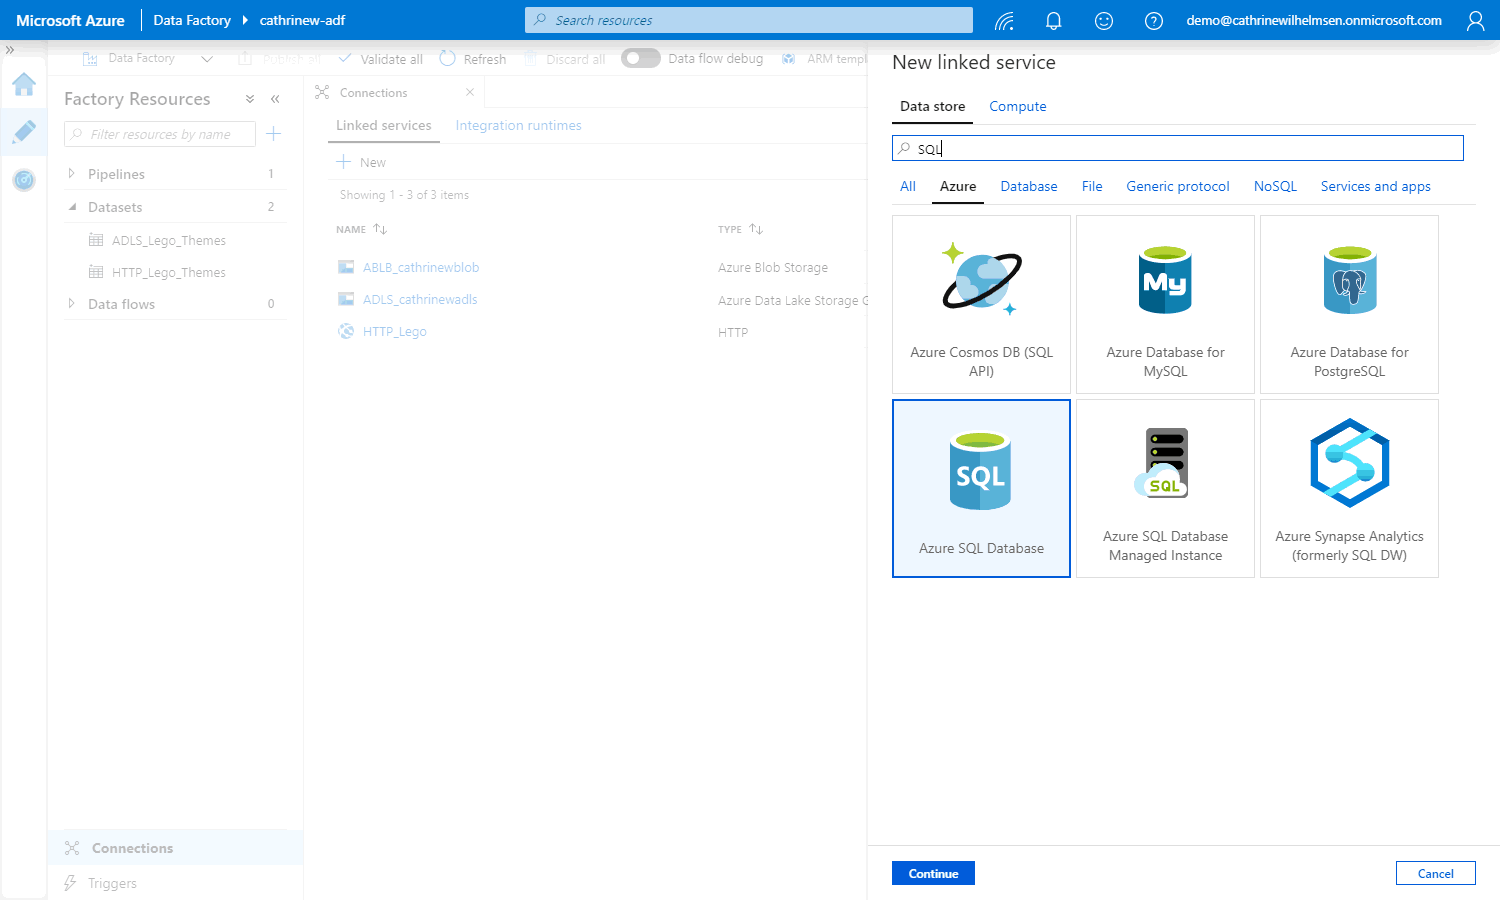 Screenshot of the new linked service pane, highlighting the Azure SQL Database connector